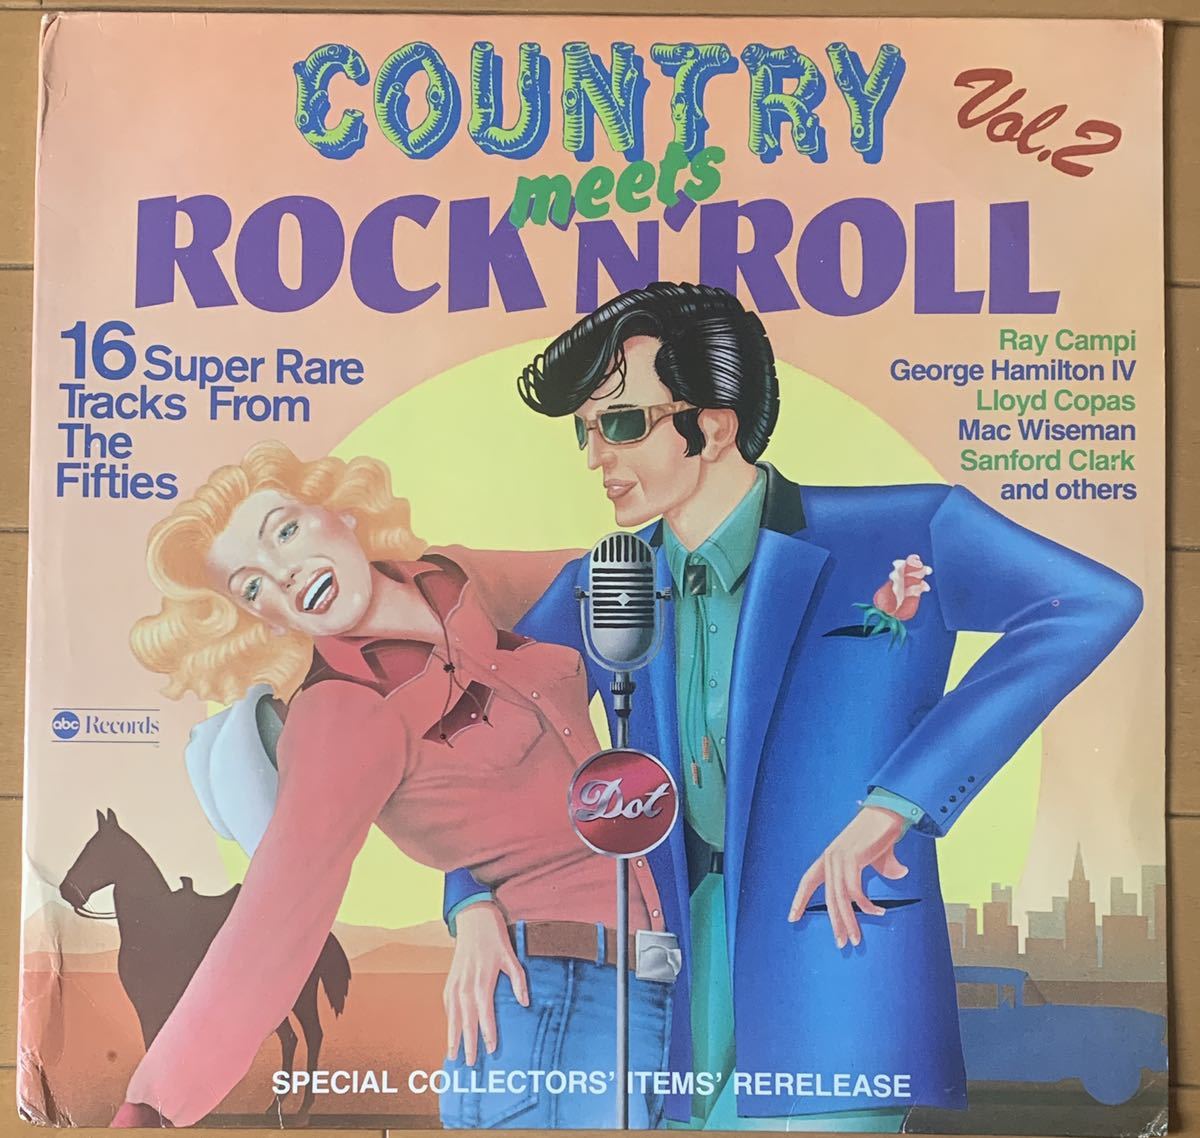 V.A.ロカビリー、カントリー、Country Meets Rock'n'Roll Vol.2、Jimmy C. Newman、Jimmy Boyd、Ray Campi、LP、1978年、ABC RECORDS_画像1